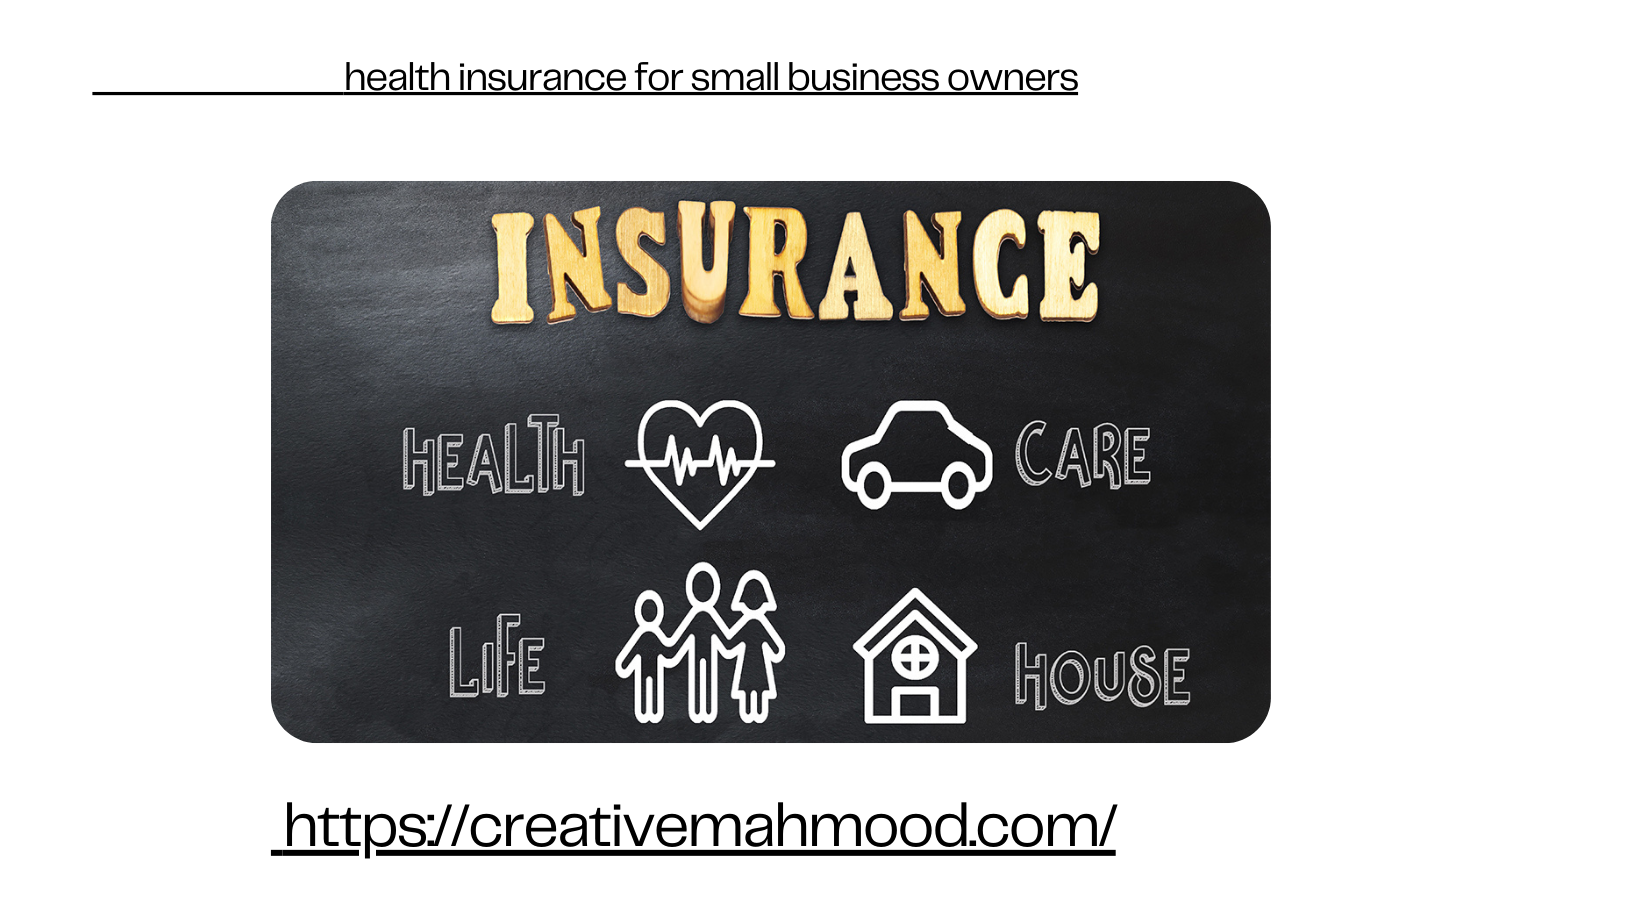 Health insurance for small business owners